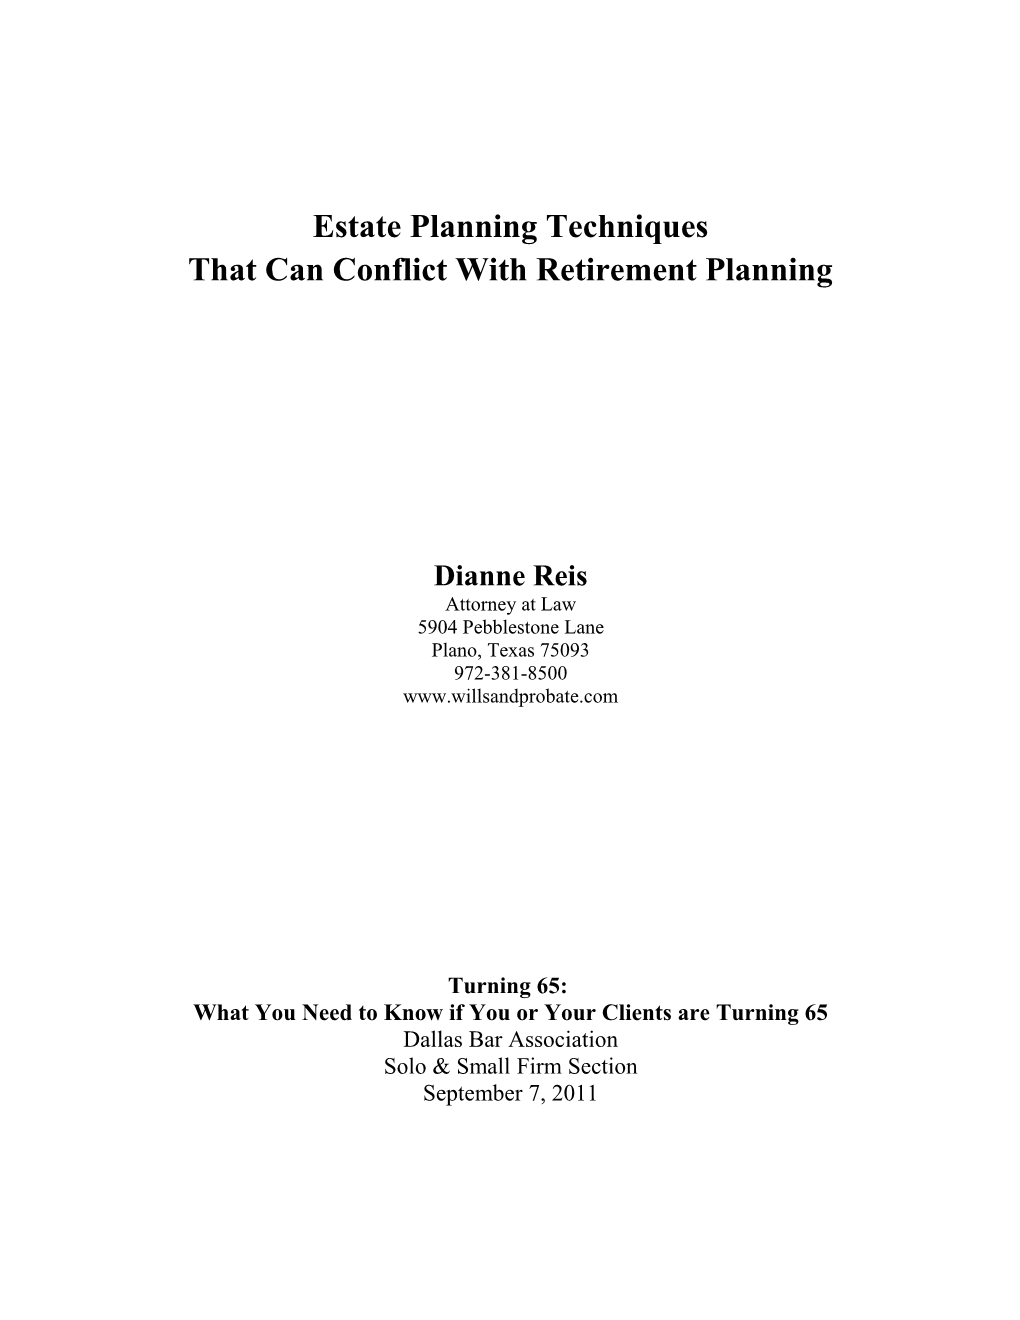 Conflicts Between Traditional Estate Planning and Medicaid Planning